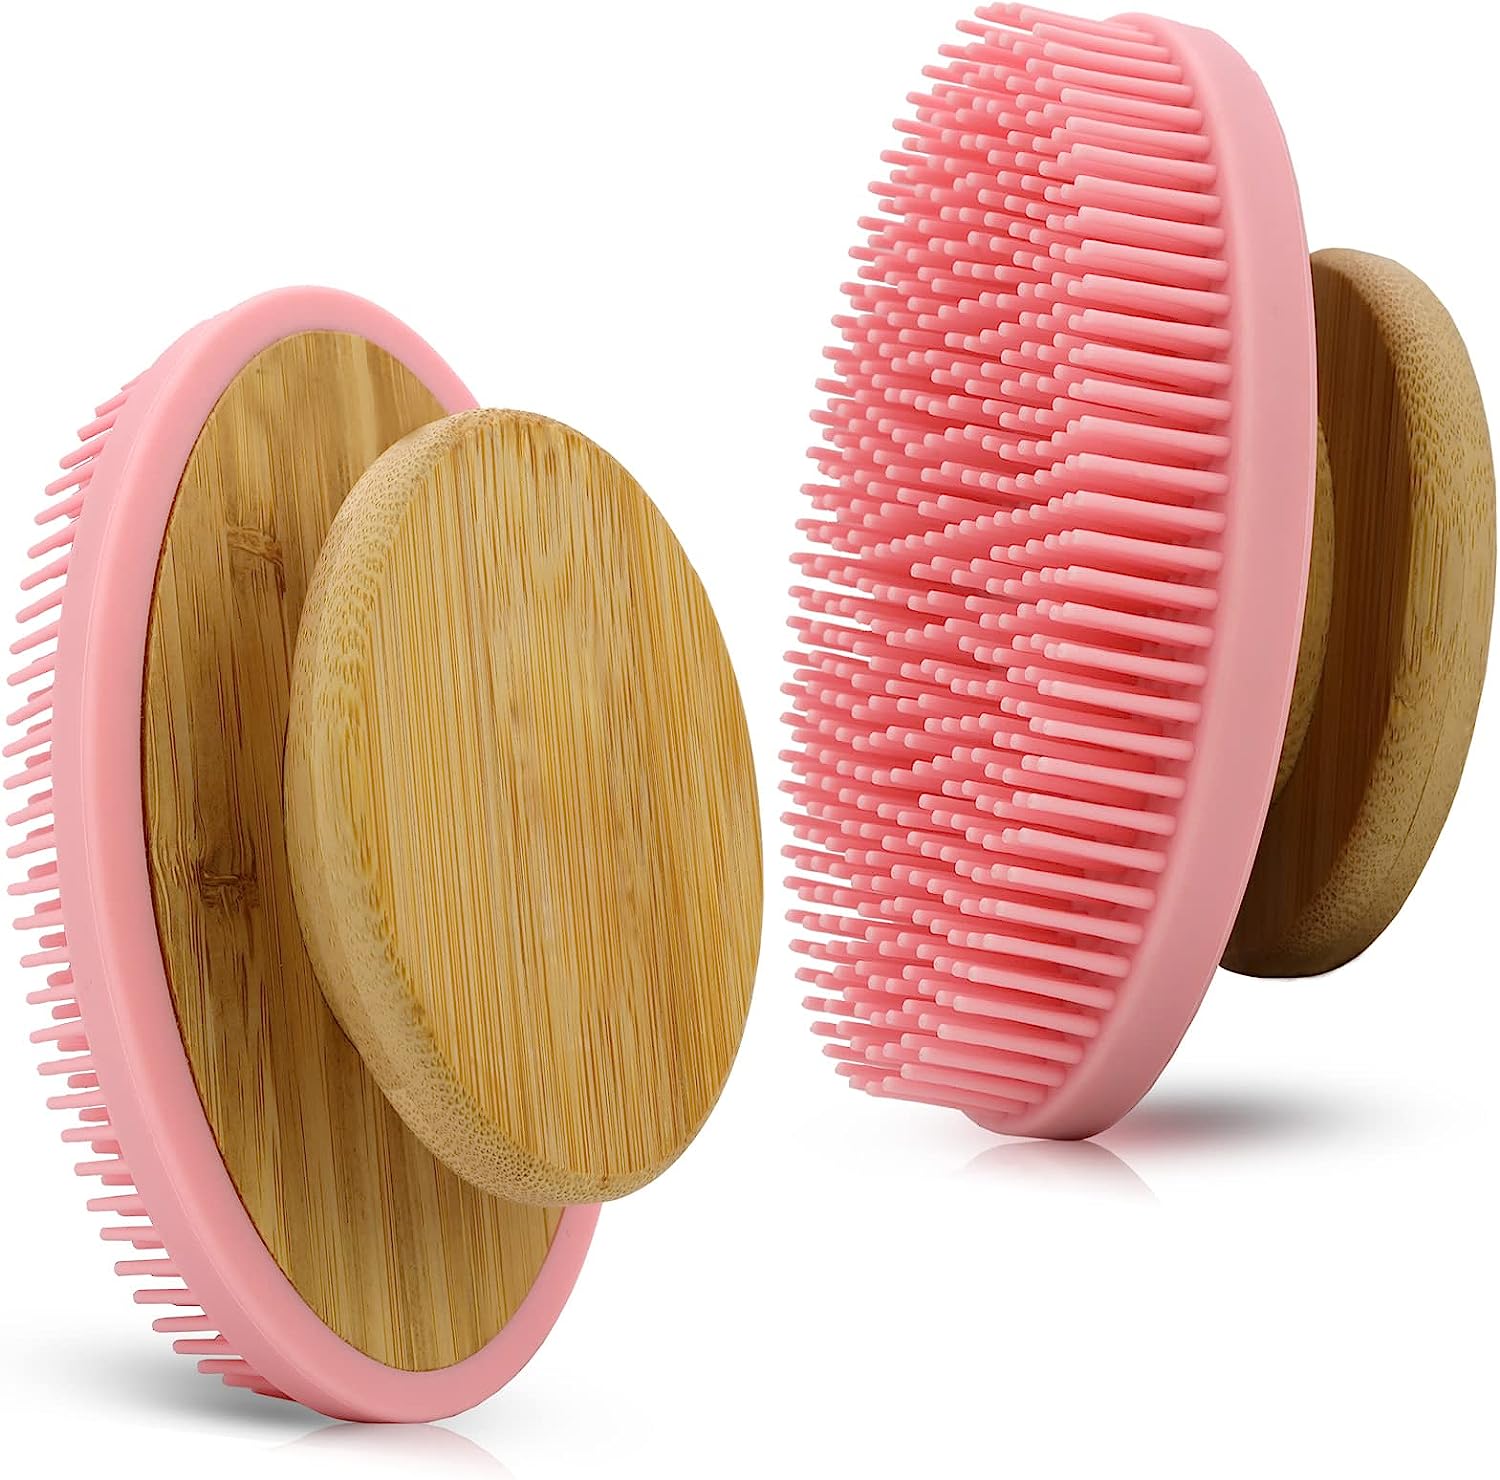 Soft Silicone Body Scrubber Shower Brush - Teetothe Lifestyle